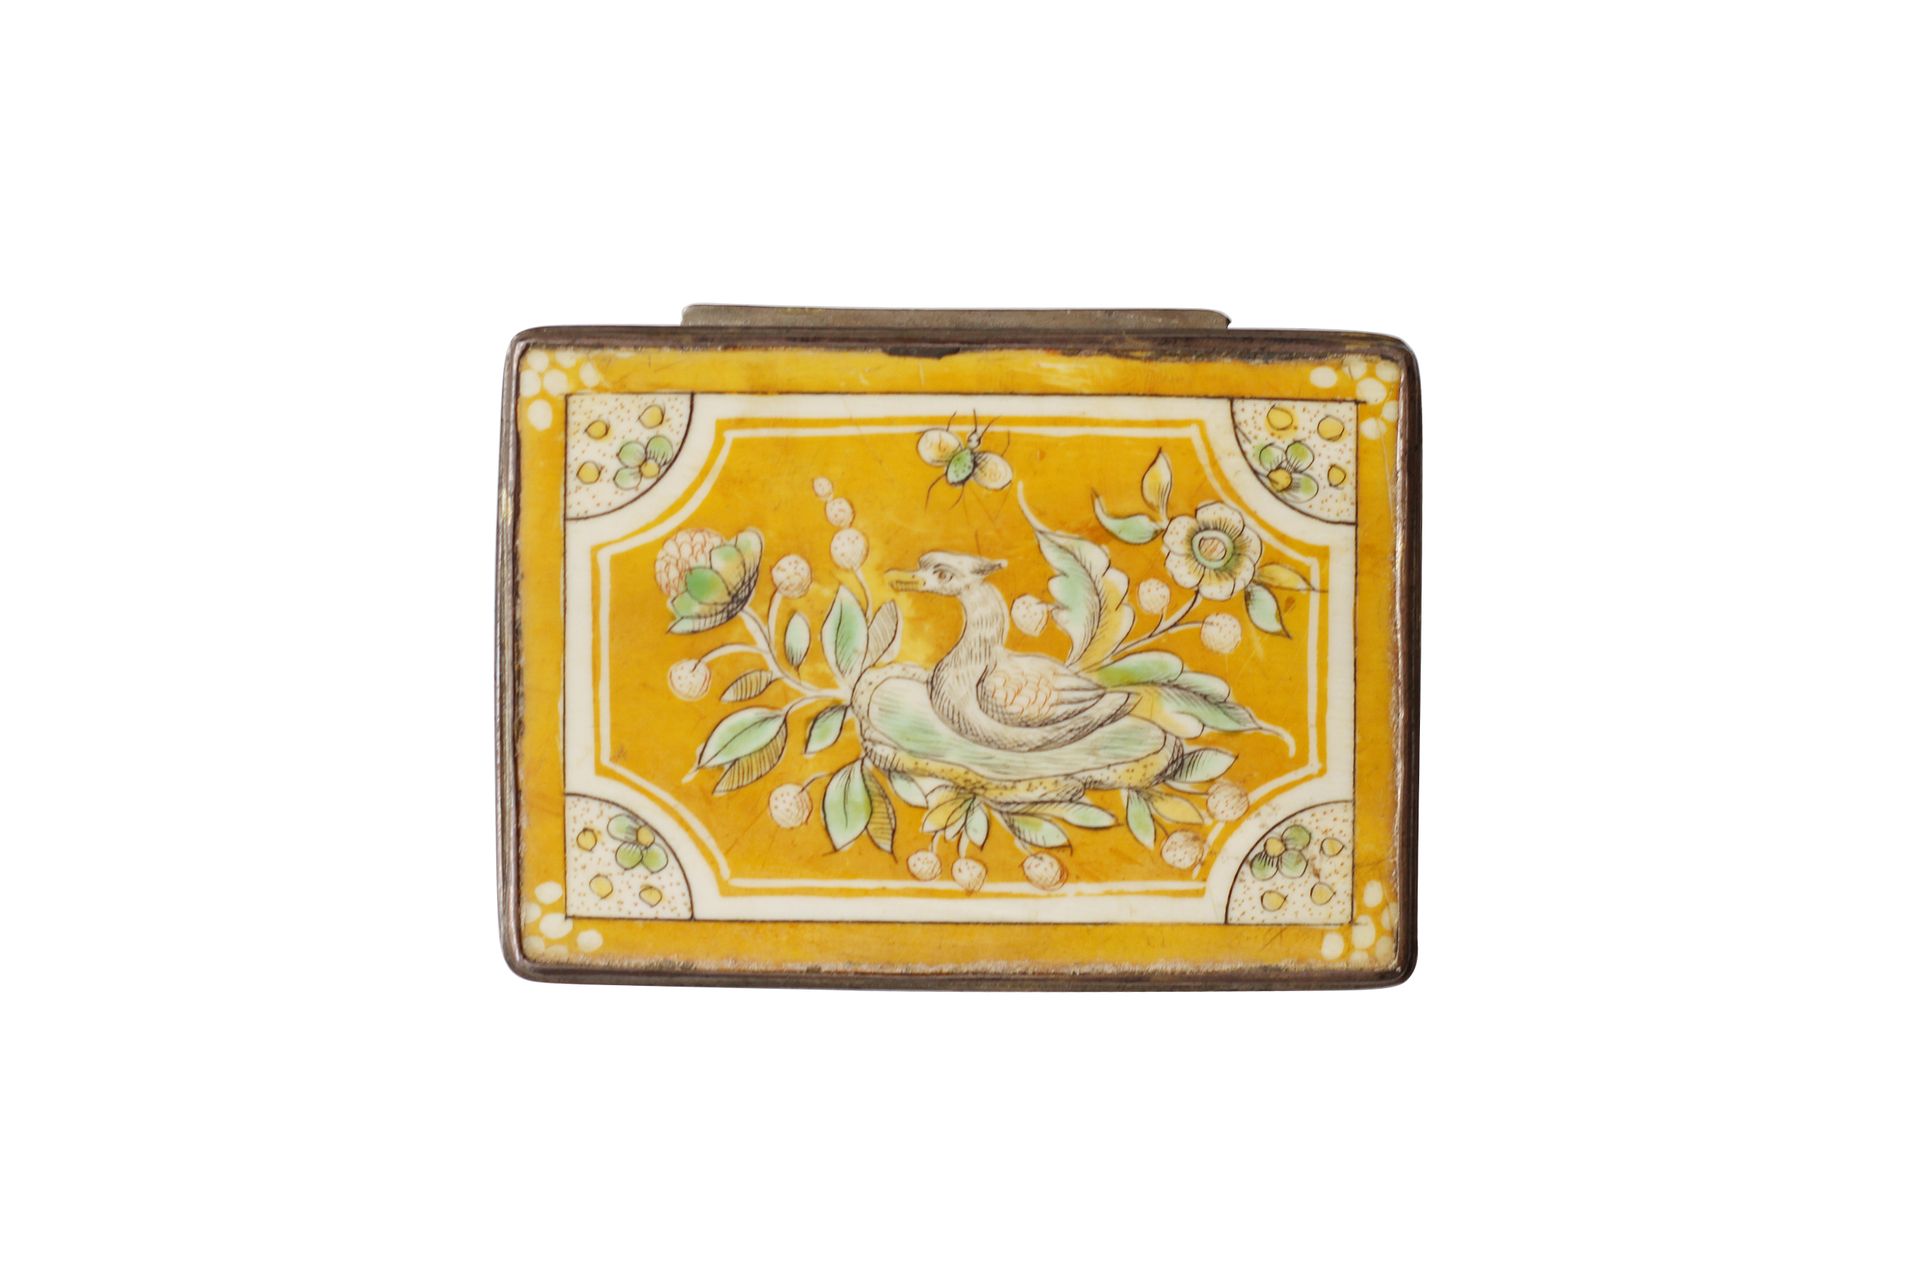 A mid 19th century Persian metal snuff box with painted bone top Persische Schnu&hellip;